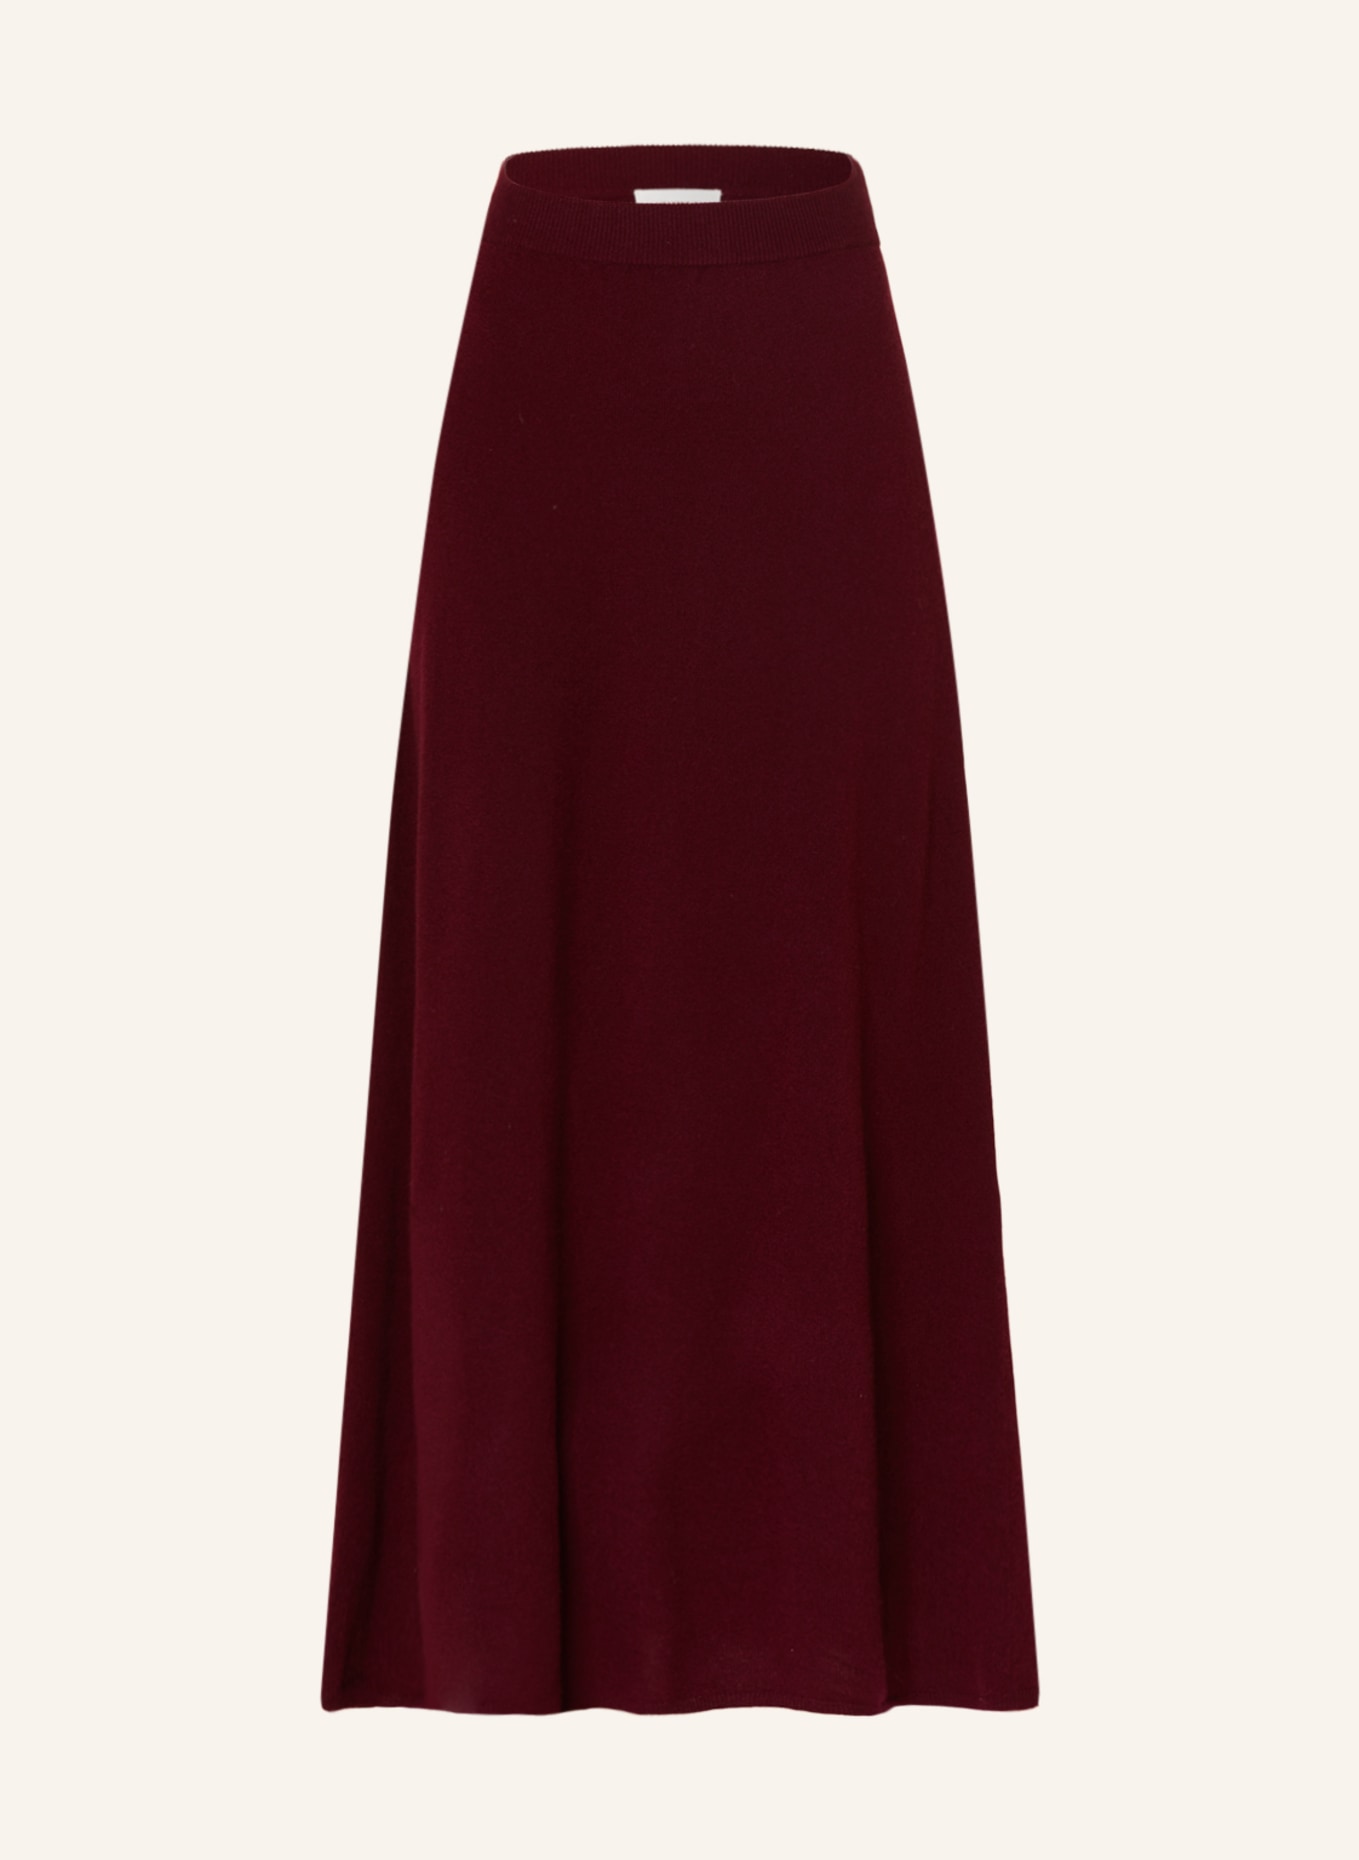 LISA YANG Knit skirt DOLLY made of cashmere, Color: DARK RED (Image 1)